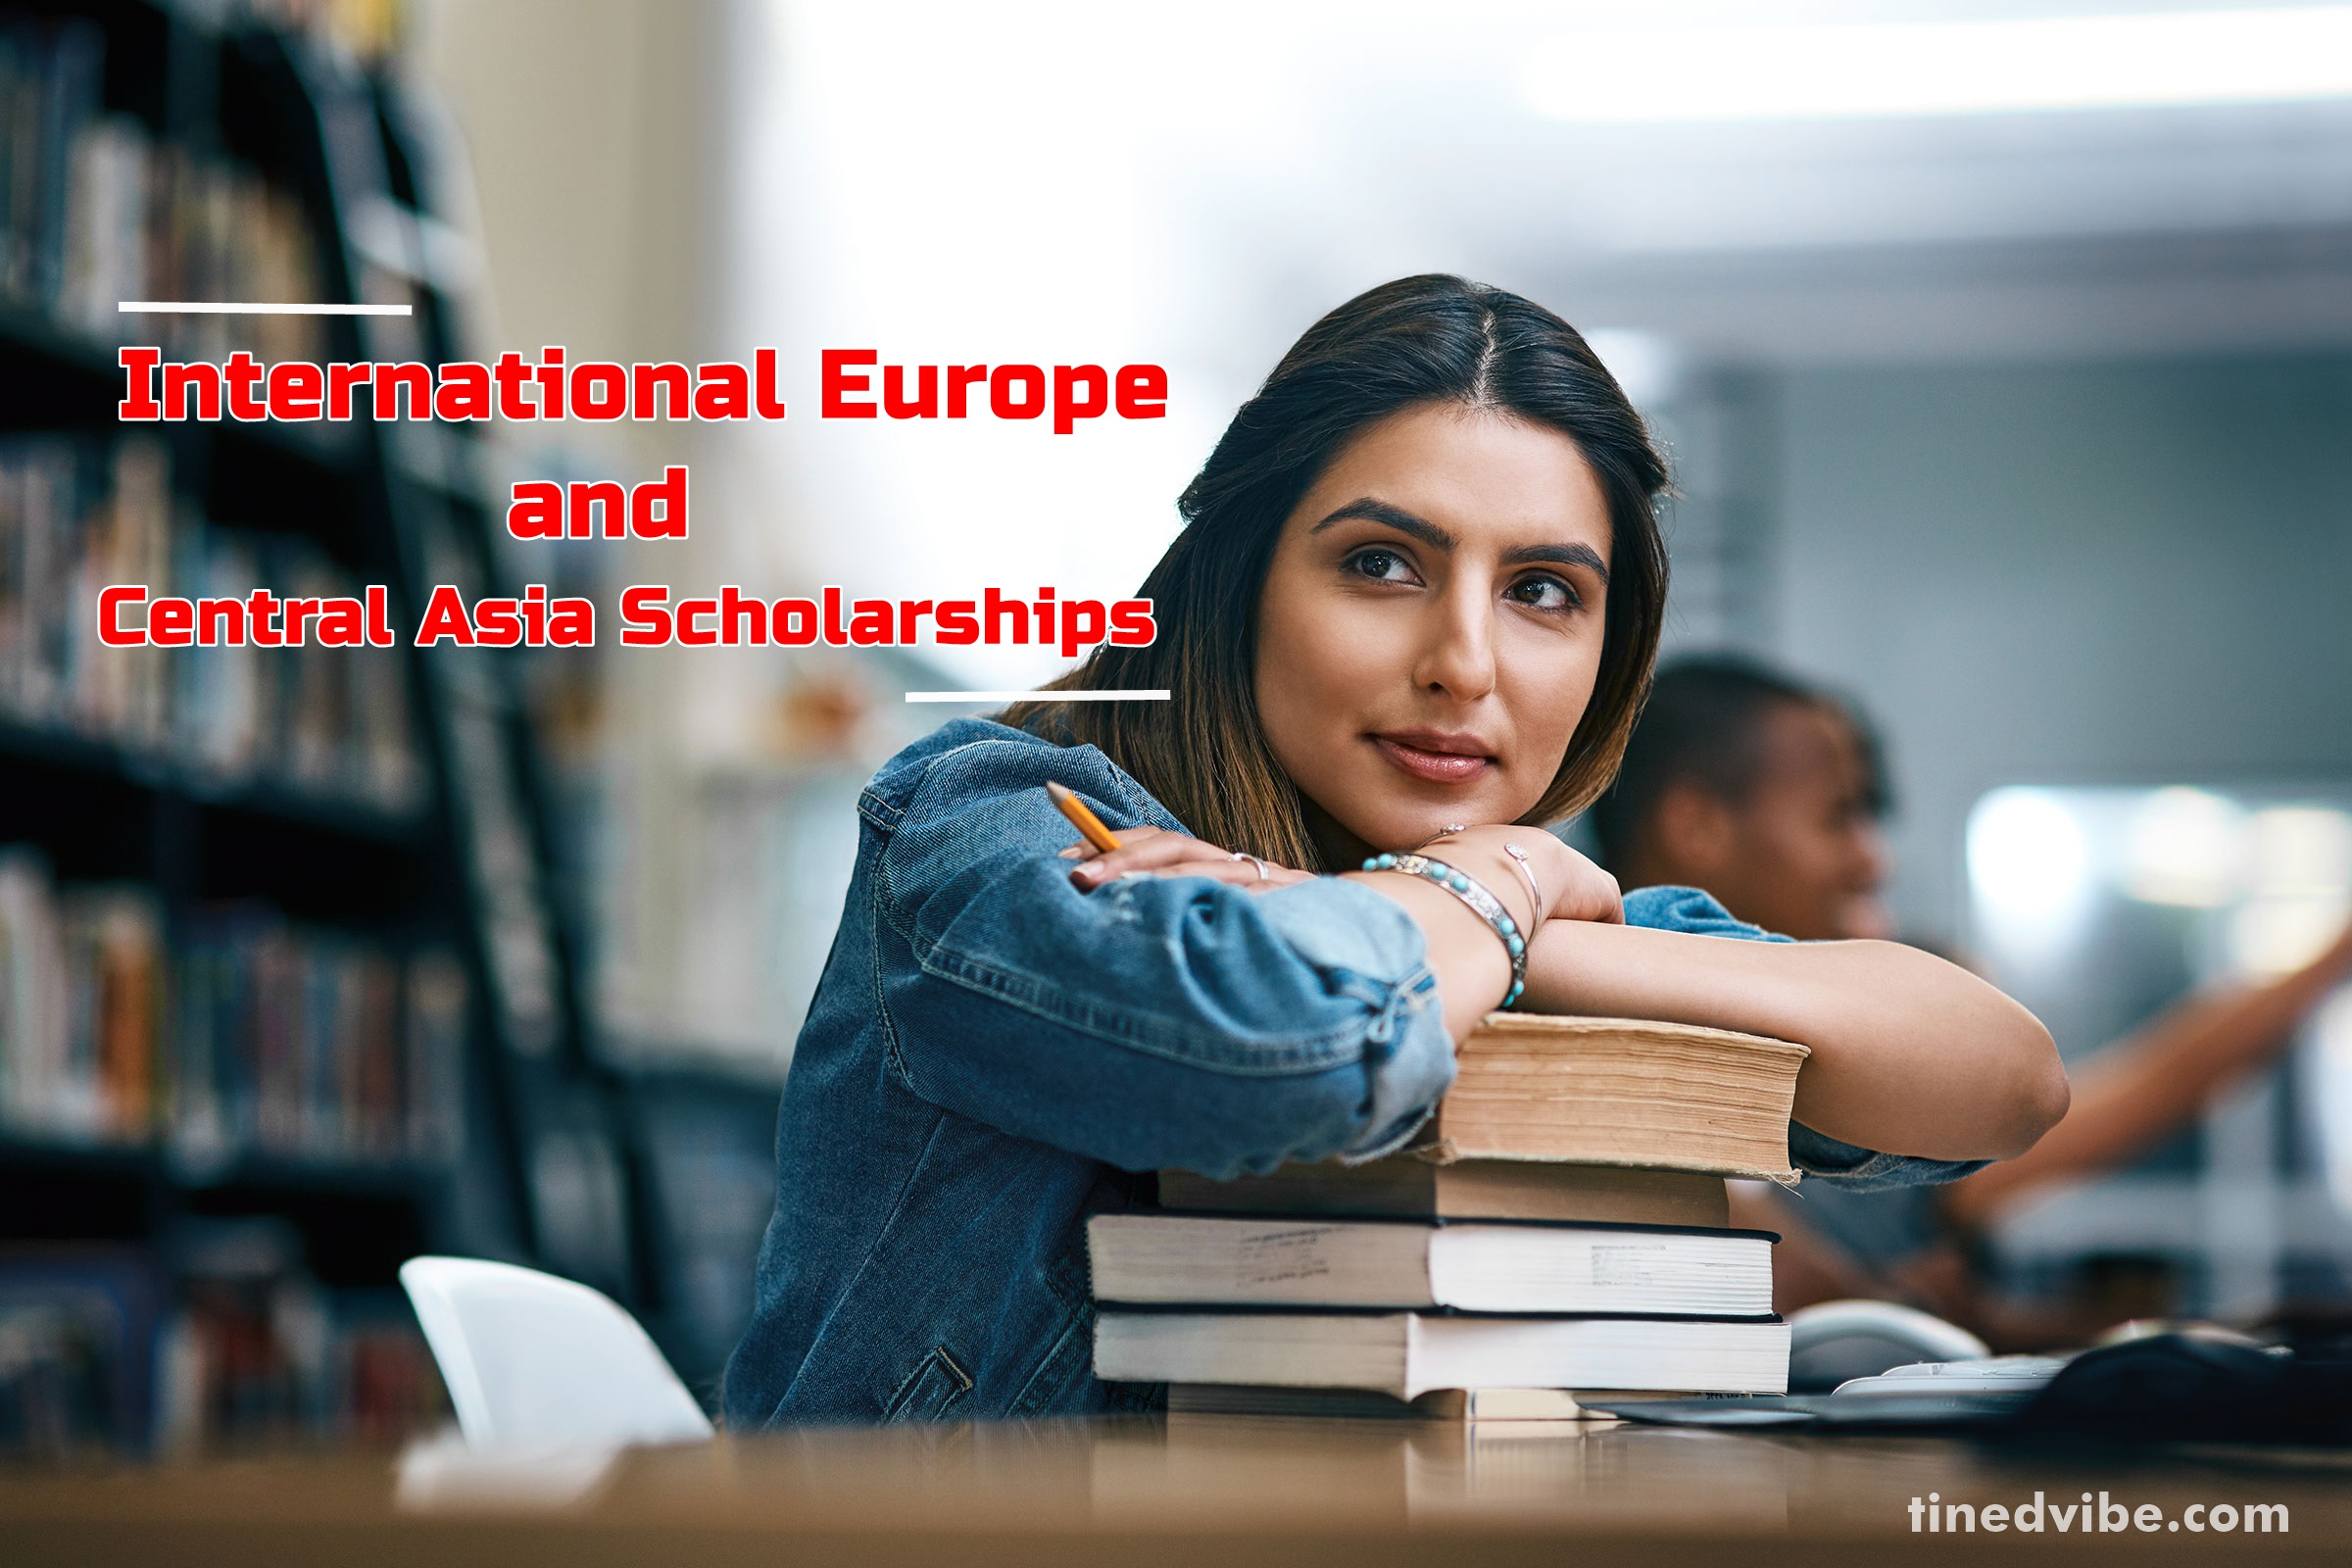 Europe and Central Asia Scholarships